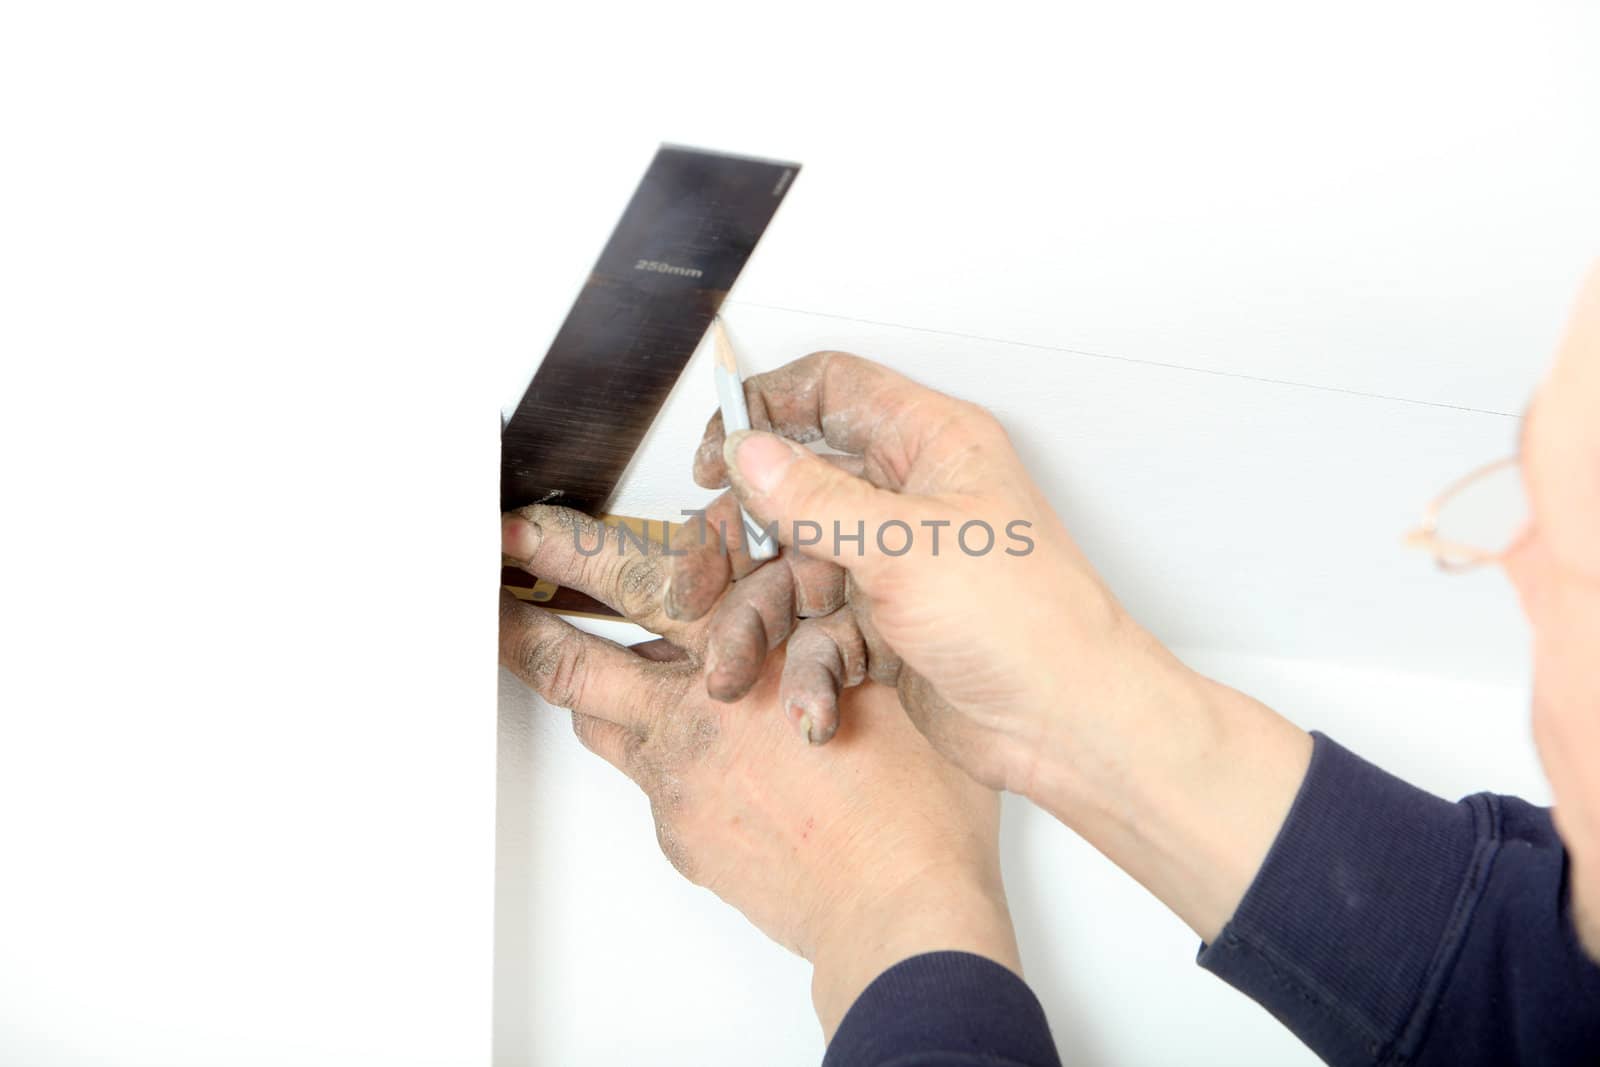 A man uses a right-angled square to measure and mark a postion on the ceiling relative to a corner of the building